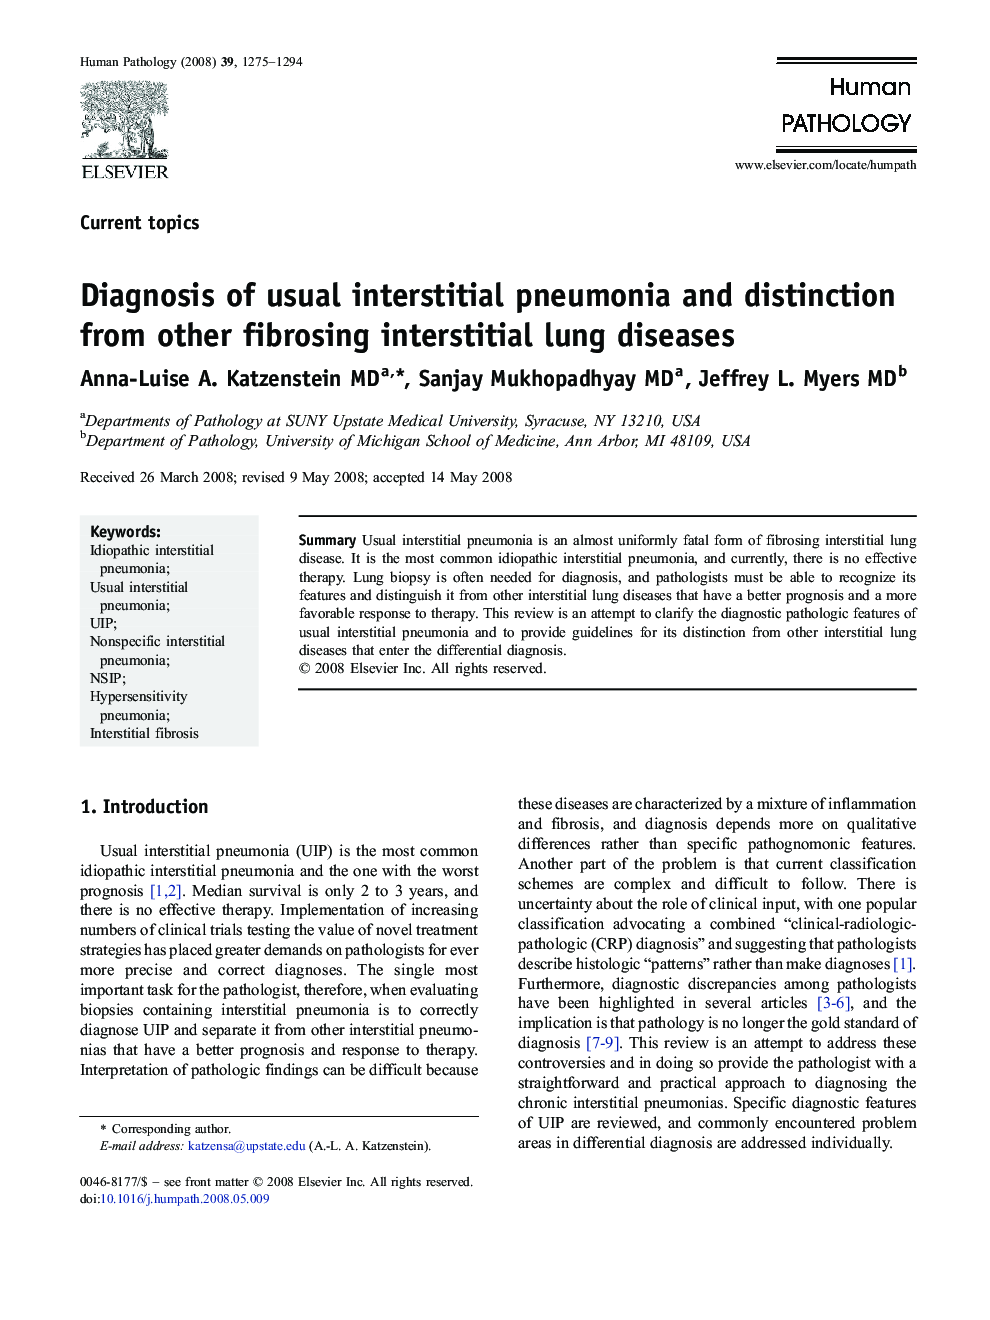 Diagnosis of usual interstitial pneumonia and distinction from other fibrosing interstitial lung diseases